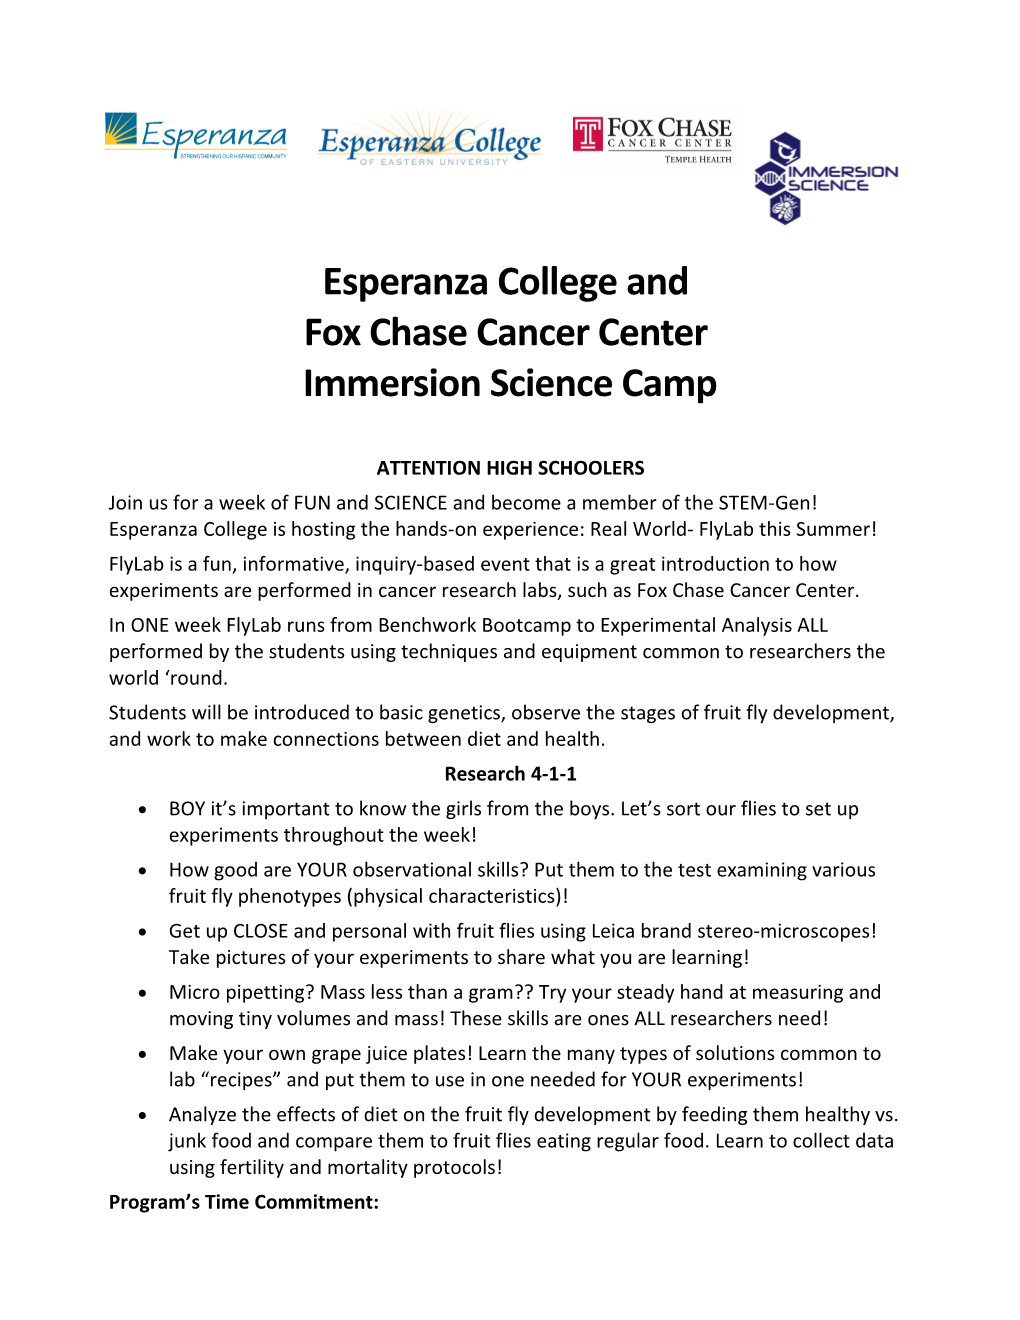 Esperanza College and Fox Chase Cancer Center Immersion Science Camp